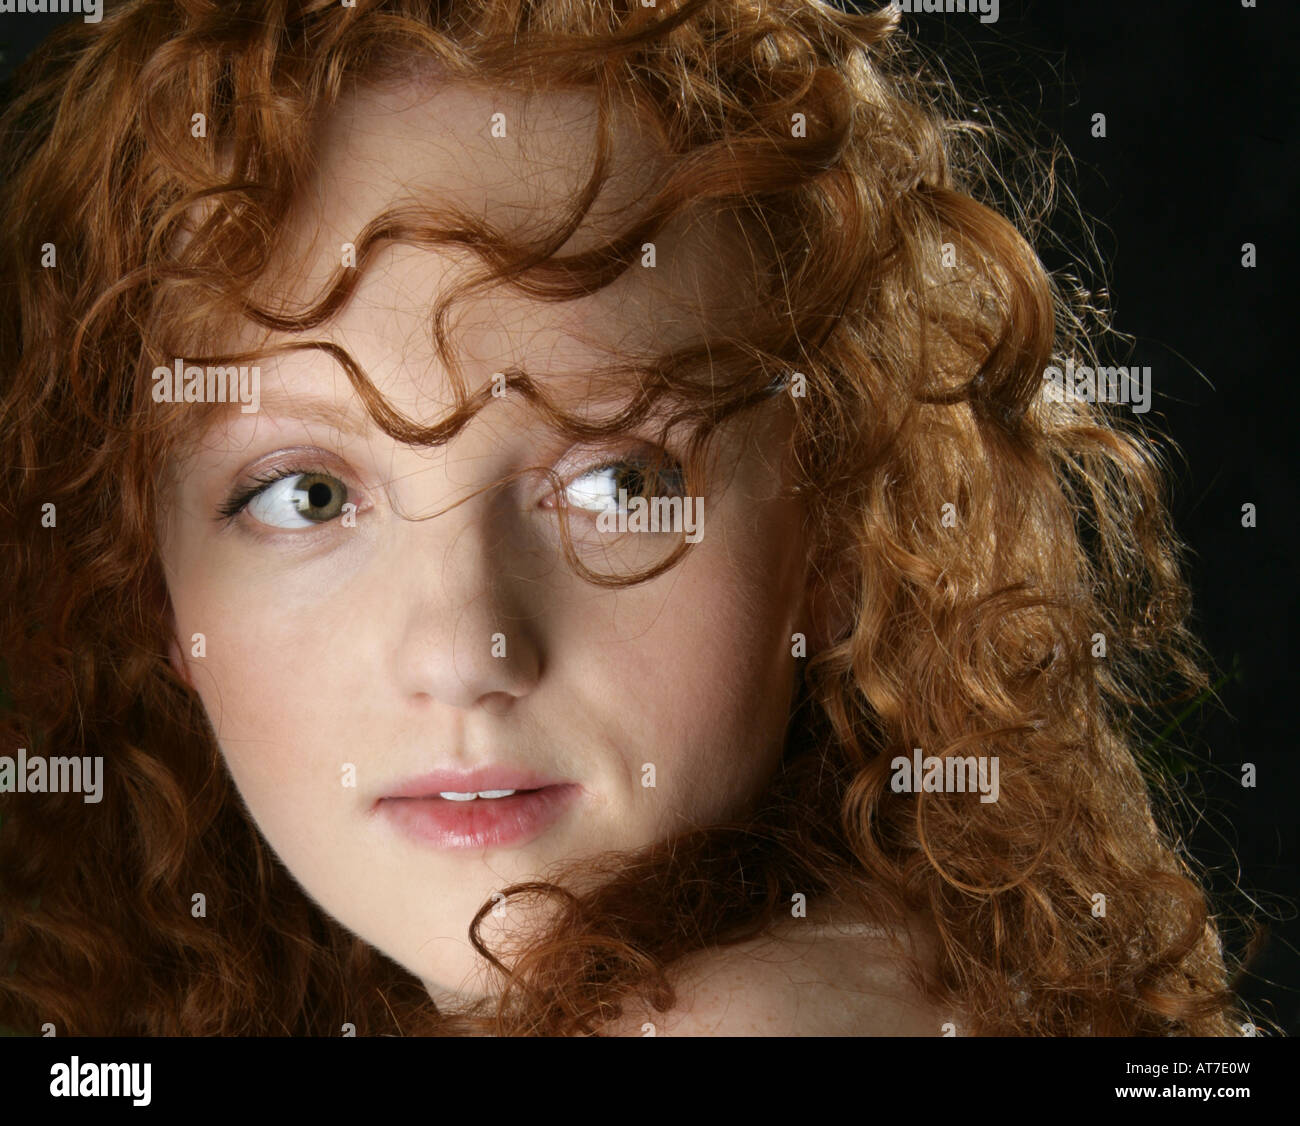 Portrait of a Young Red Haired Girl Stock Photo